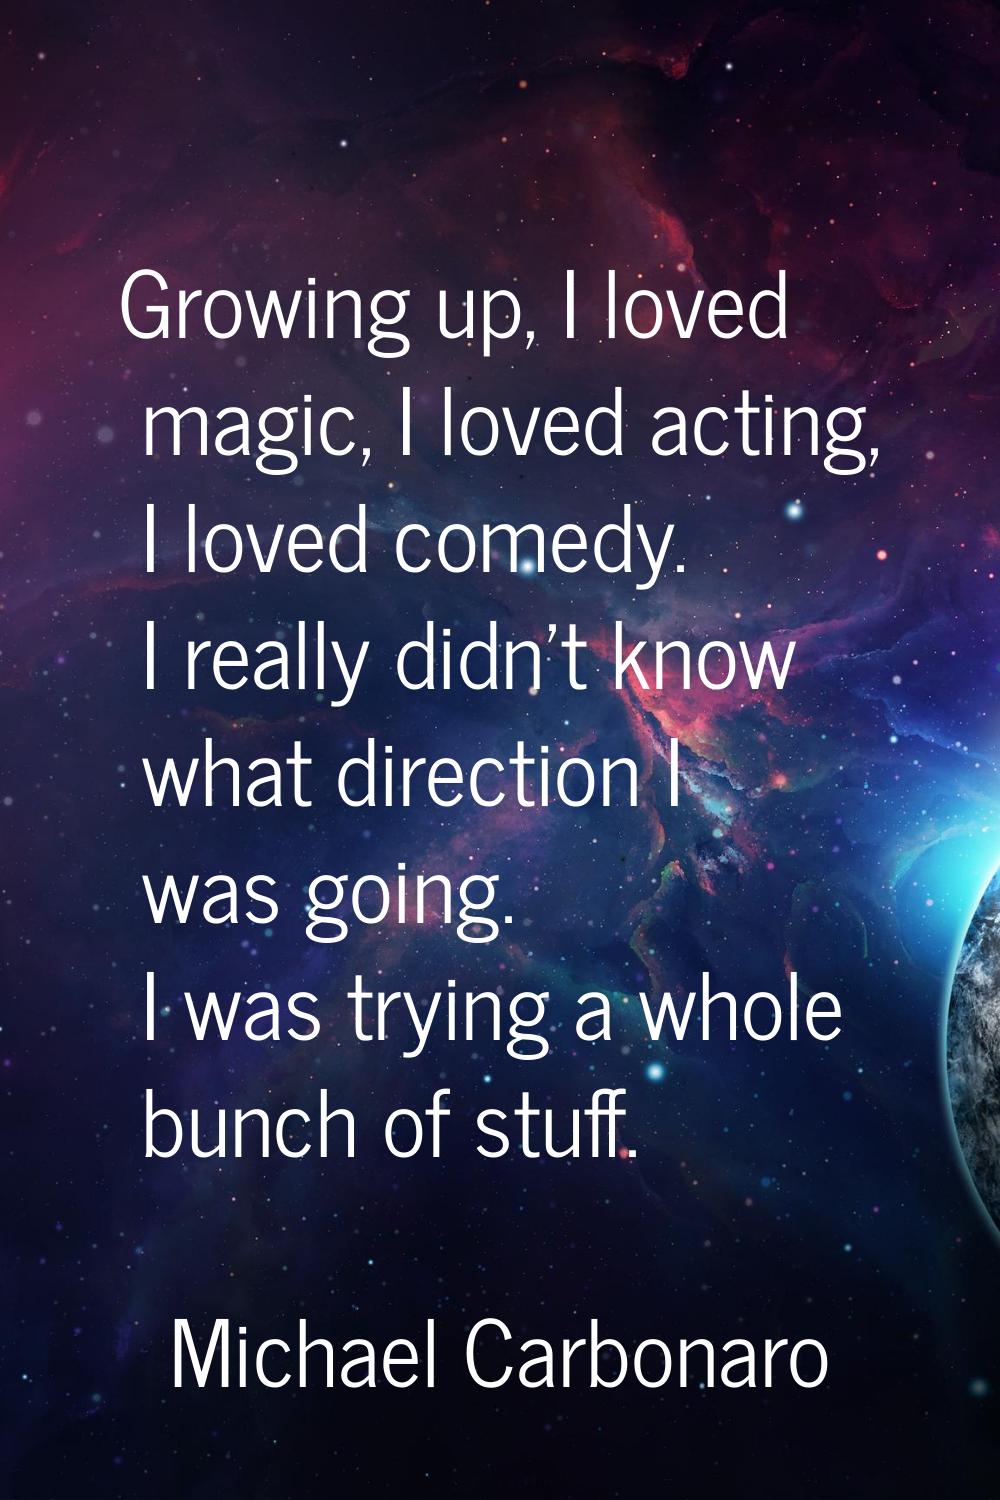 Growing up, I loved magic, I loved acting, I loved comedy. I really didn't know what direction I wa